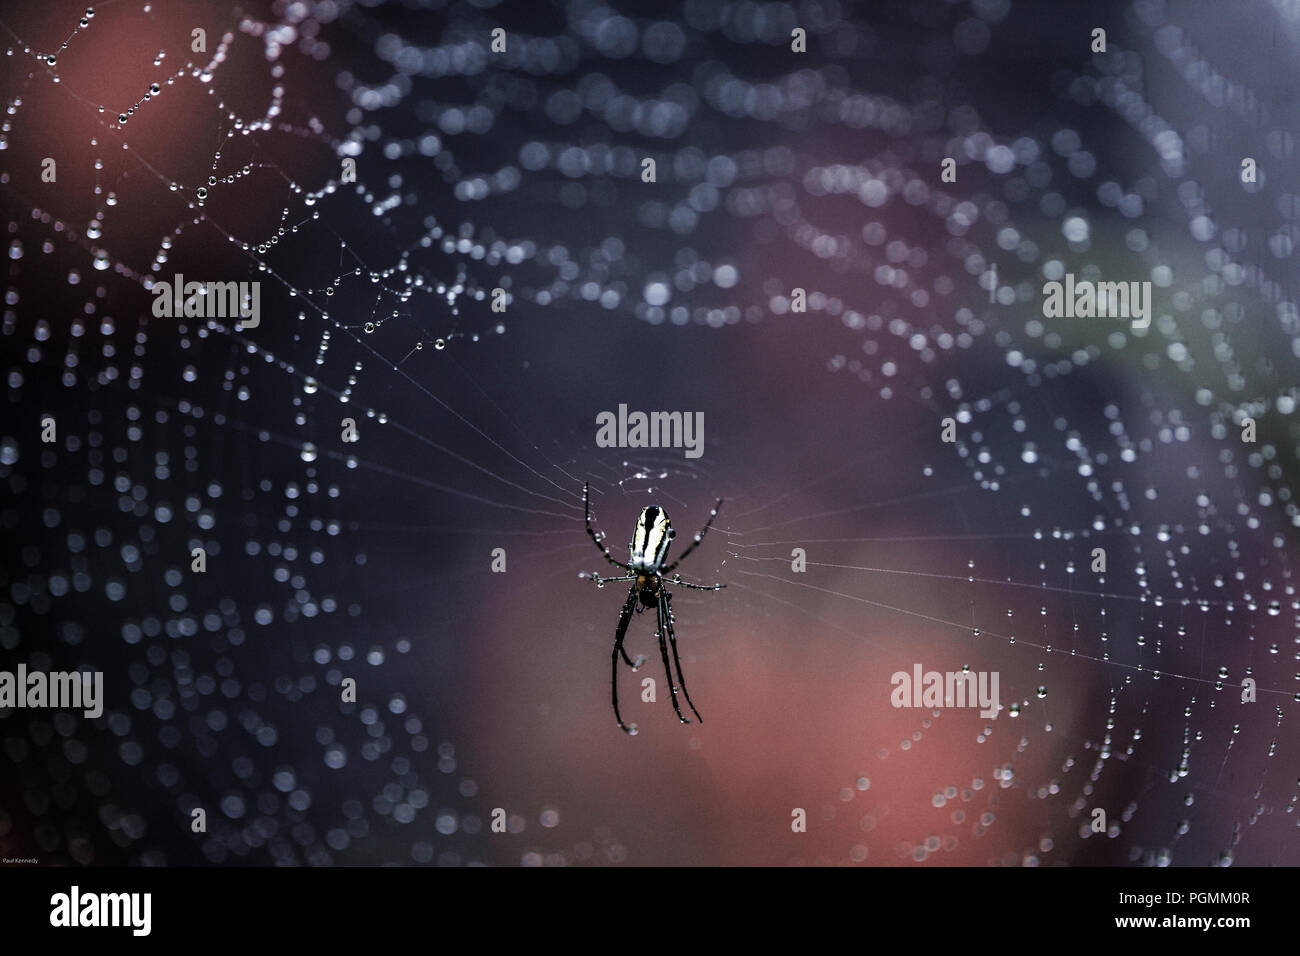 Spider in centre of spiderweb covered in rain droplets Stock Photo